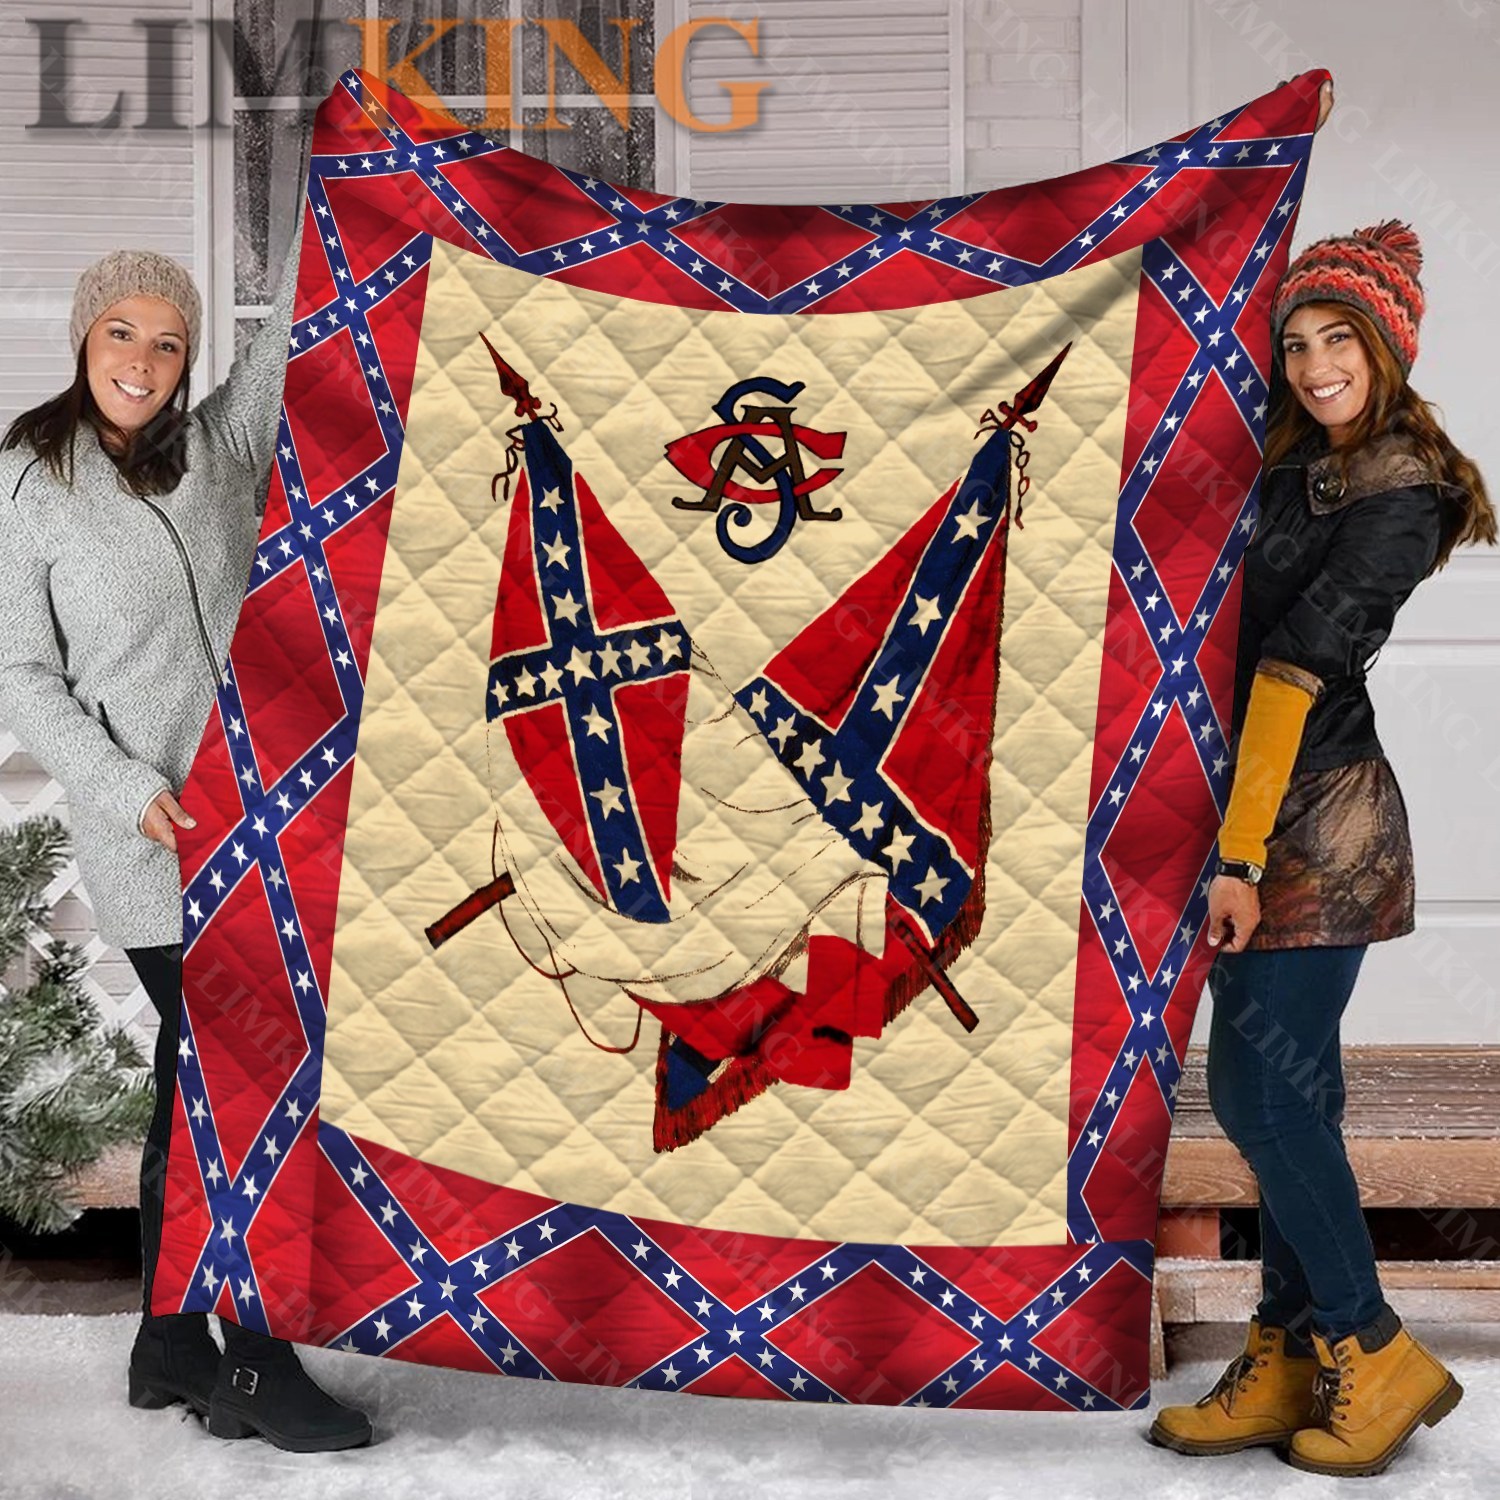 The Southern United States Confederate Flag Quilt 3